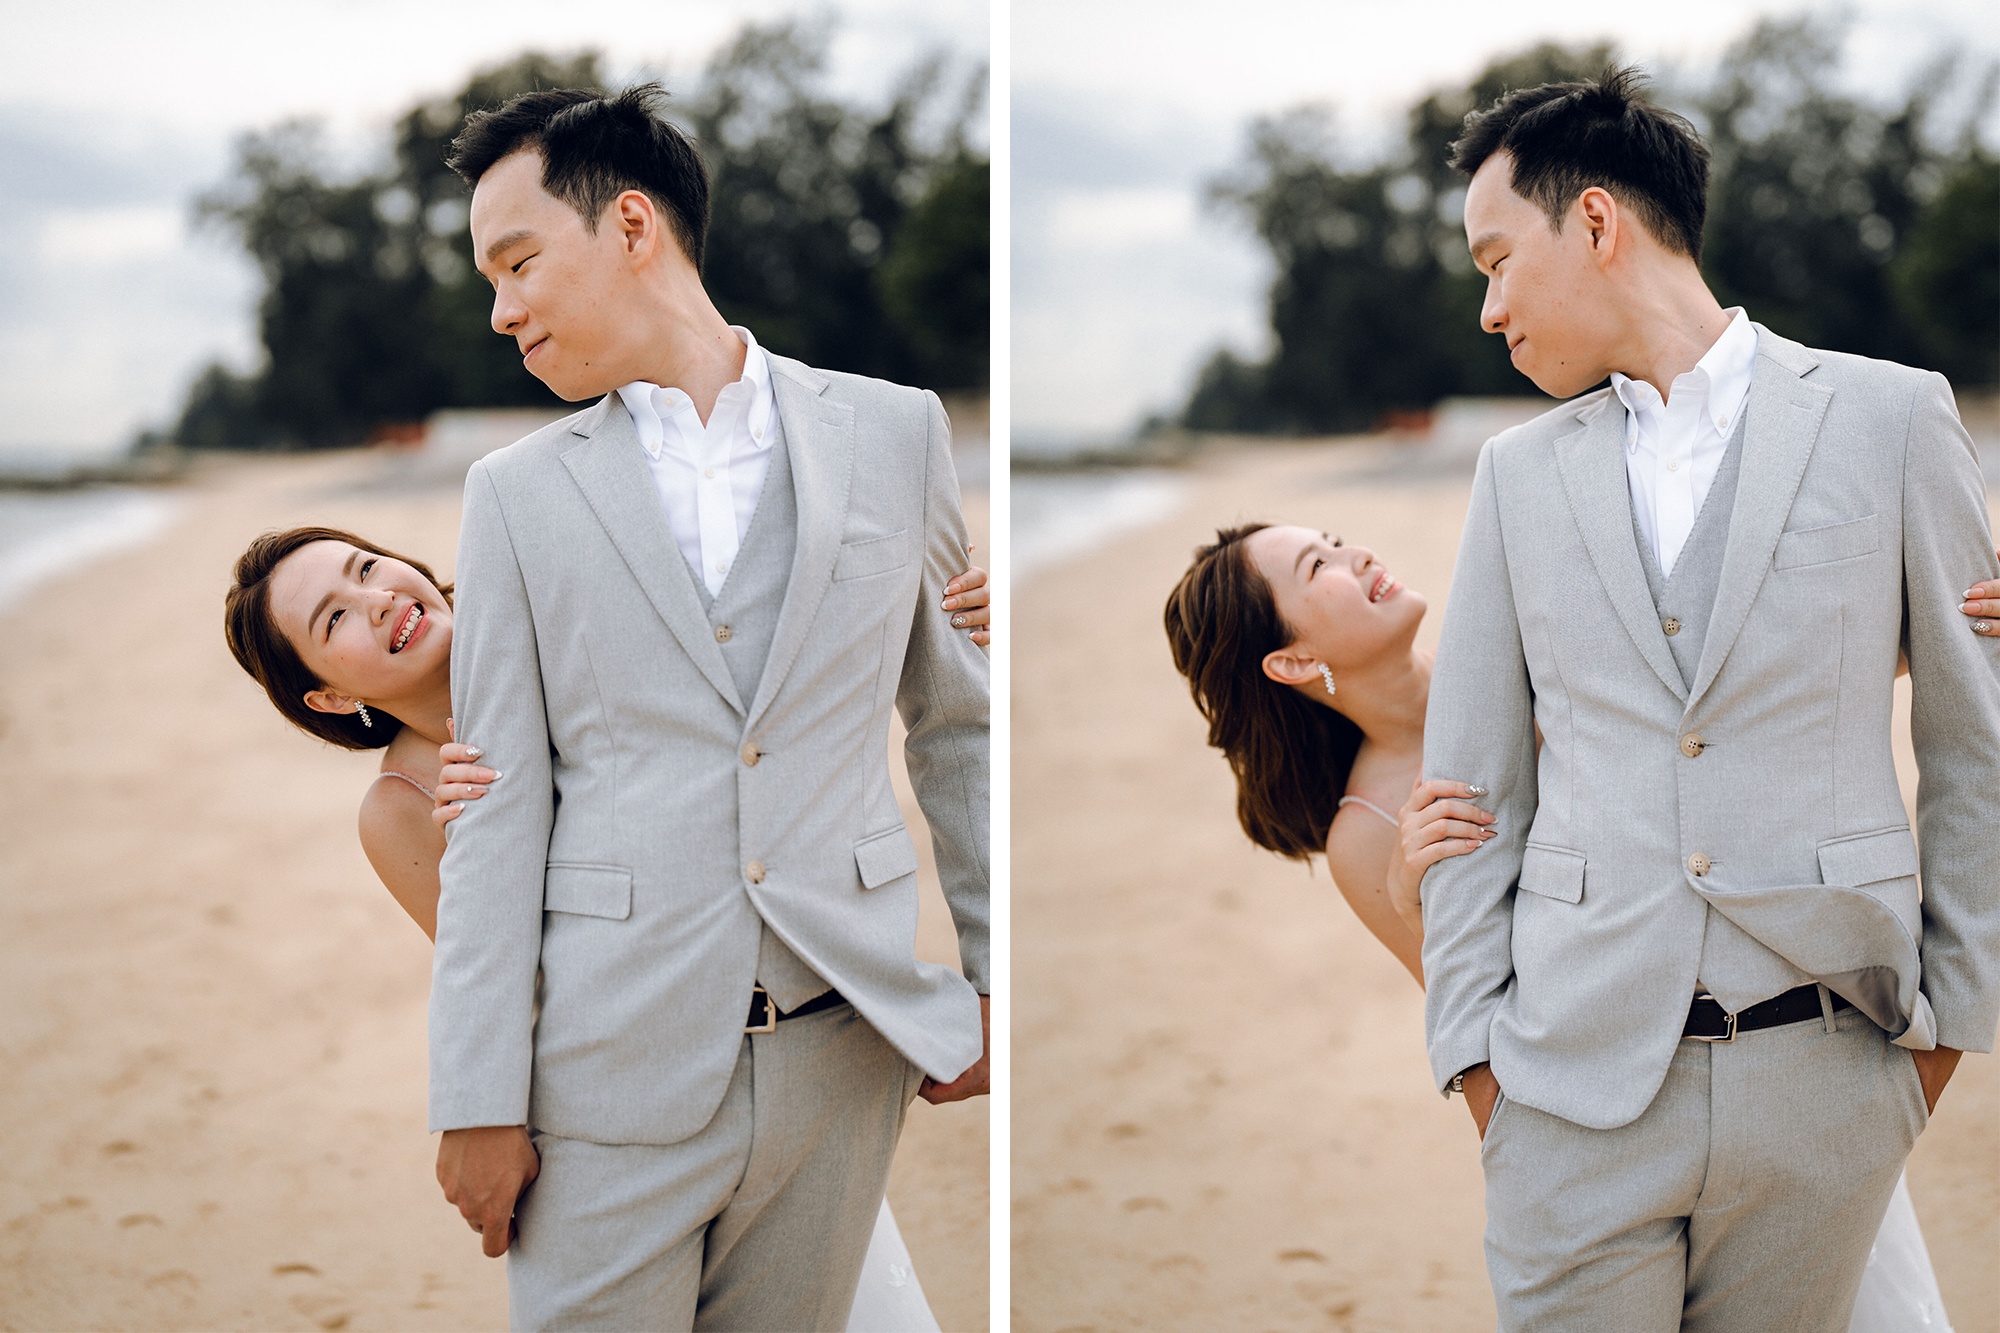 Prewedding Photoshoot At East Coast Park And Industrial Rooftop by Michael on OneThreeOneFour 20